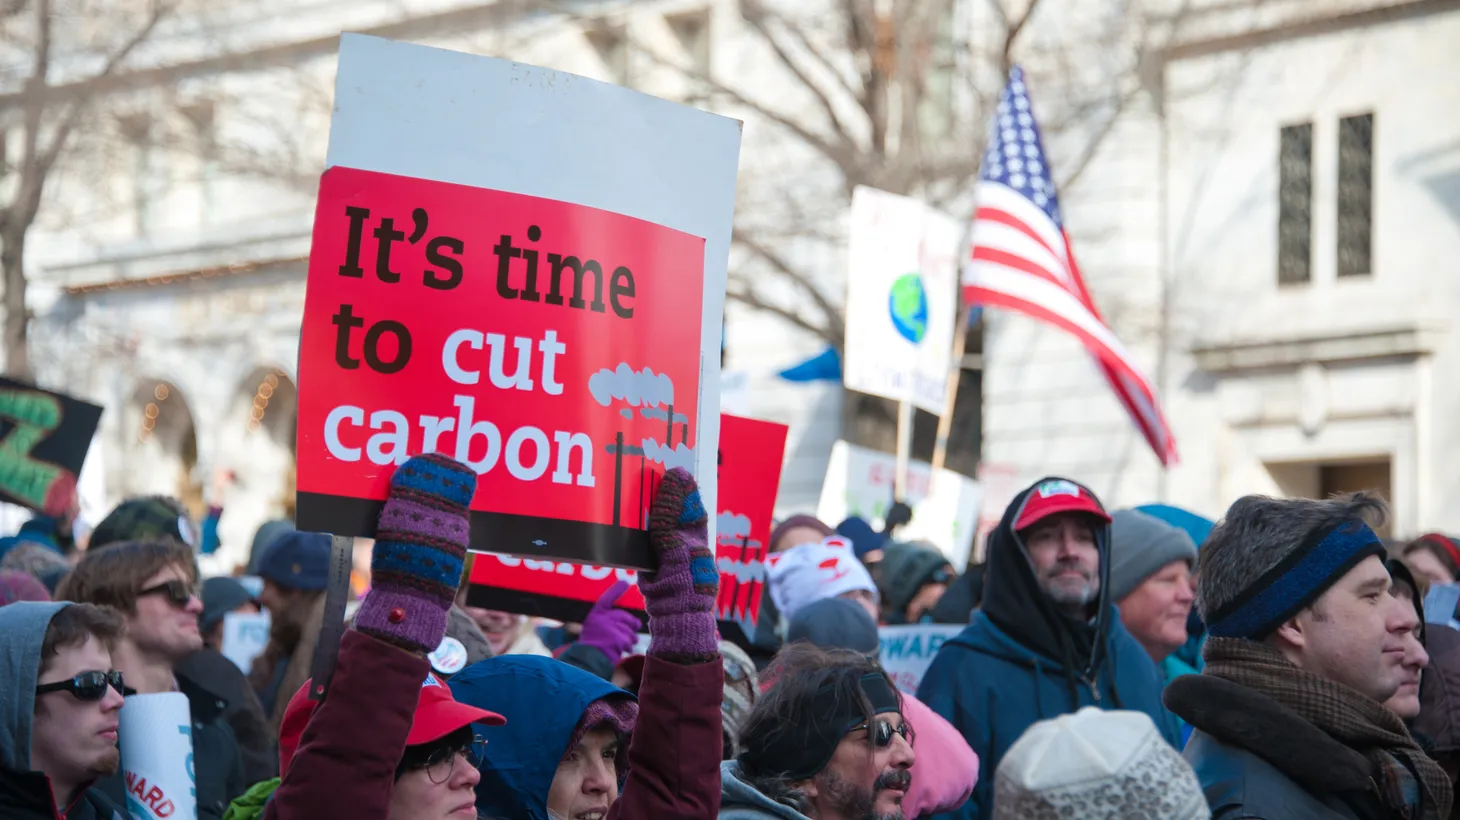 An activist holds a sign that says, “It’s time to cut carbon,” at a rally in Washington D.C.